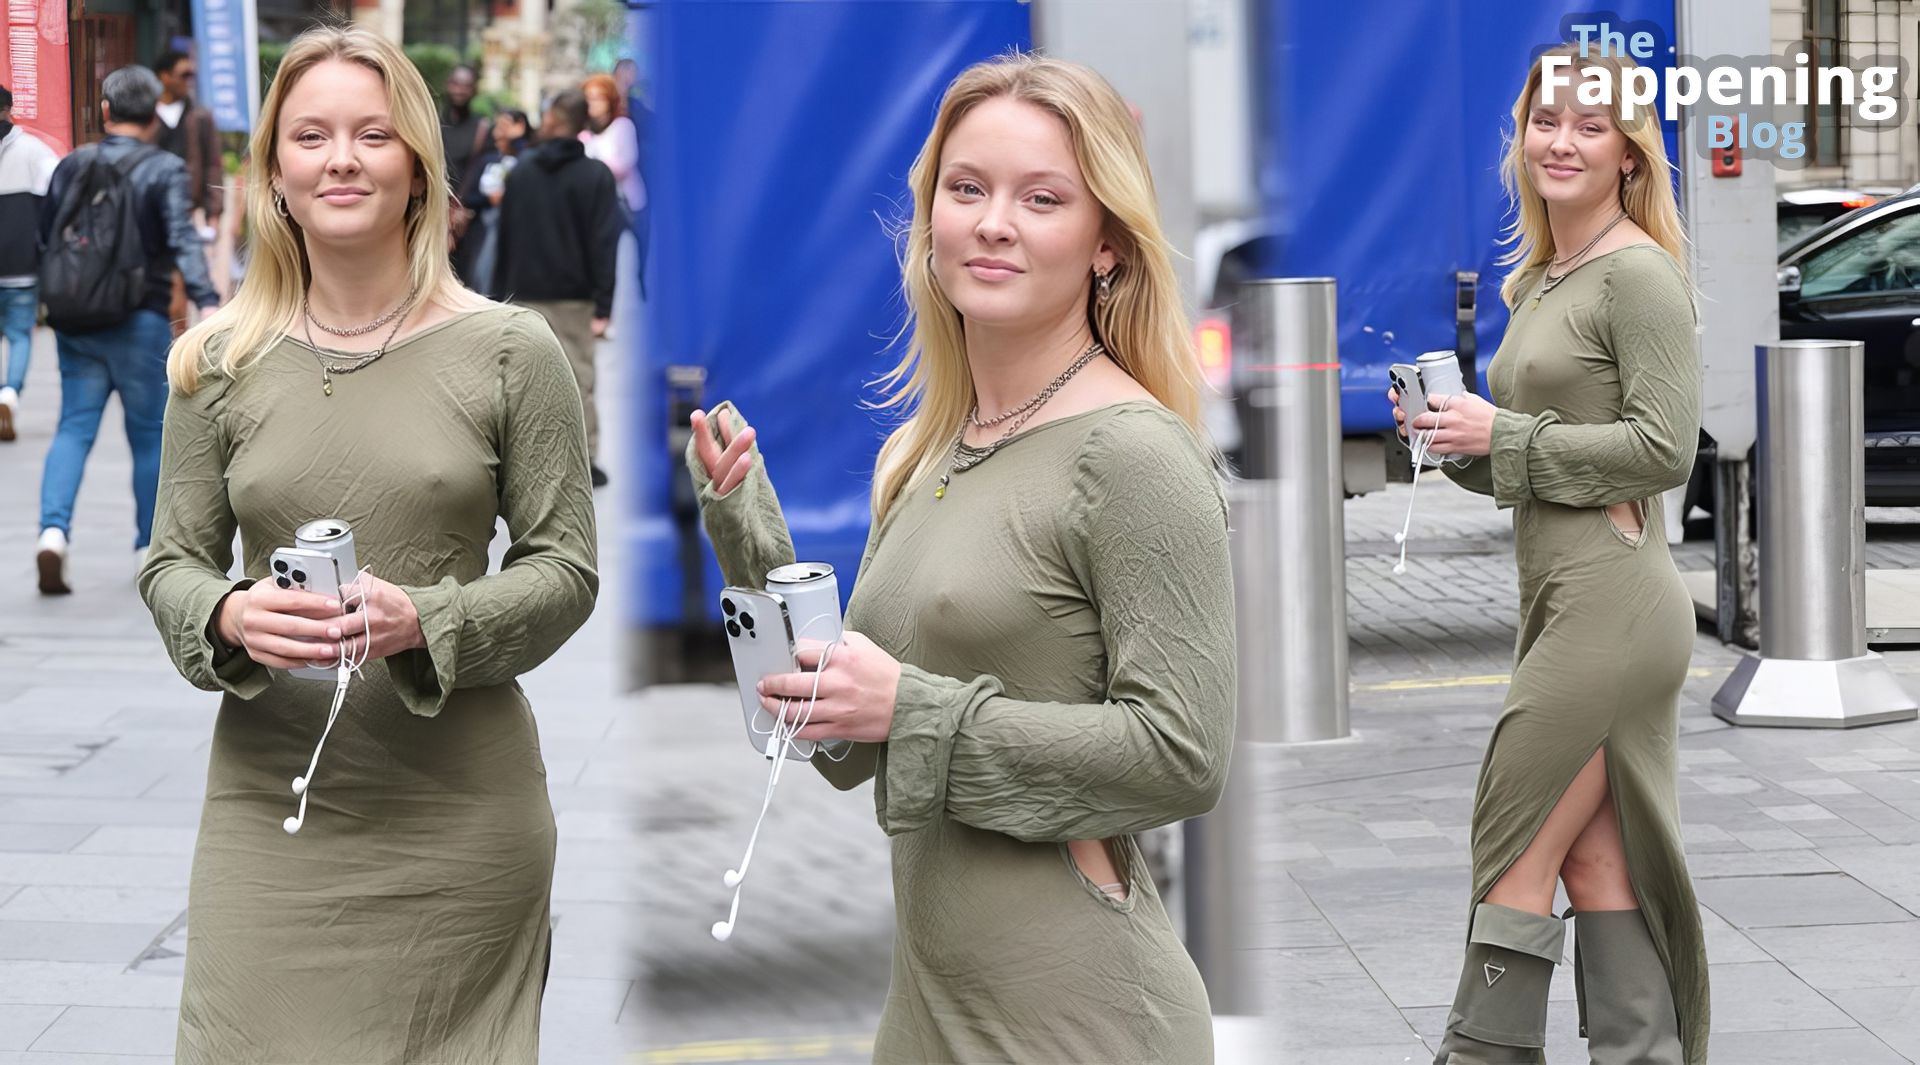 Zara Larsson Goes Braless in a Tight Green Dress Stepping Out at Capital Radio (12 Photos)